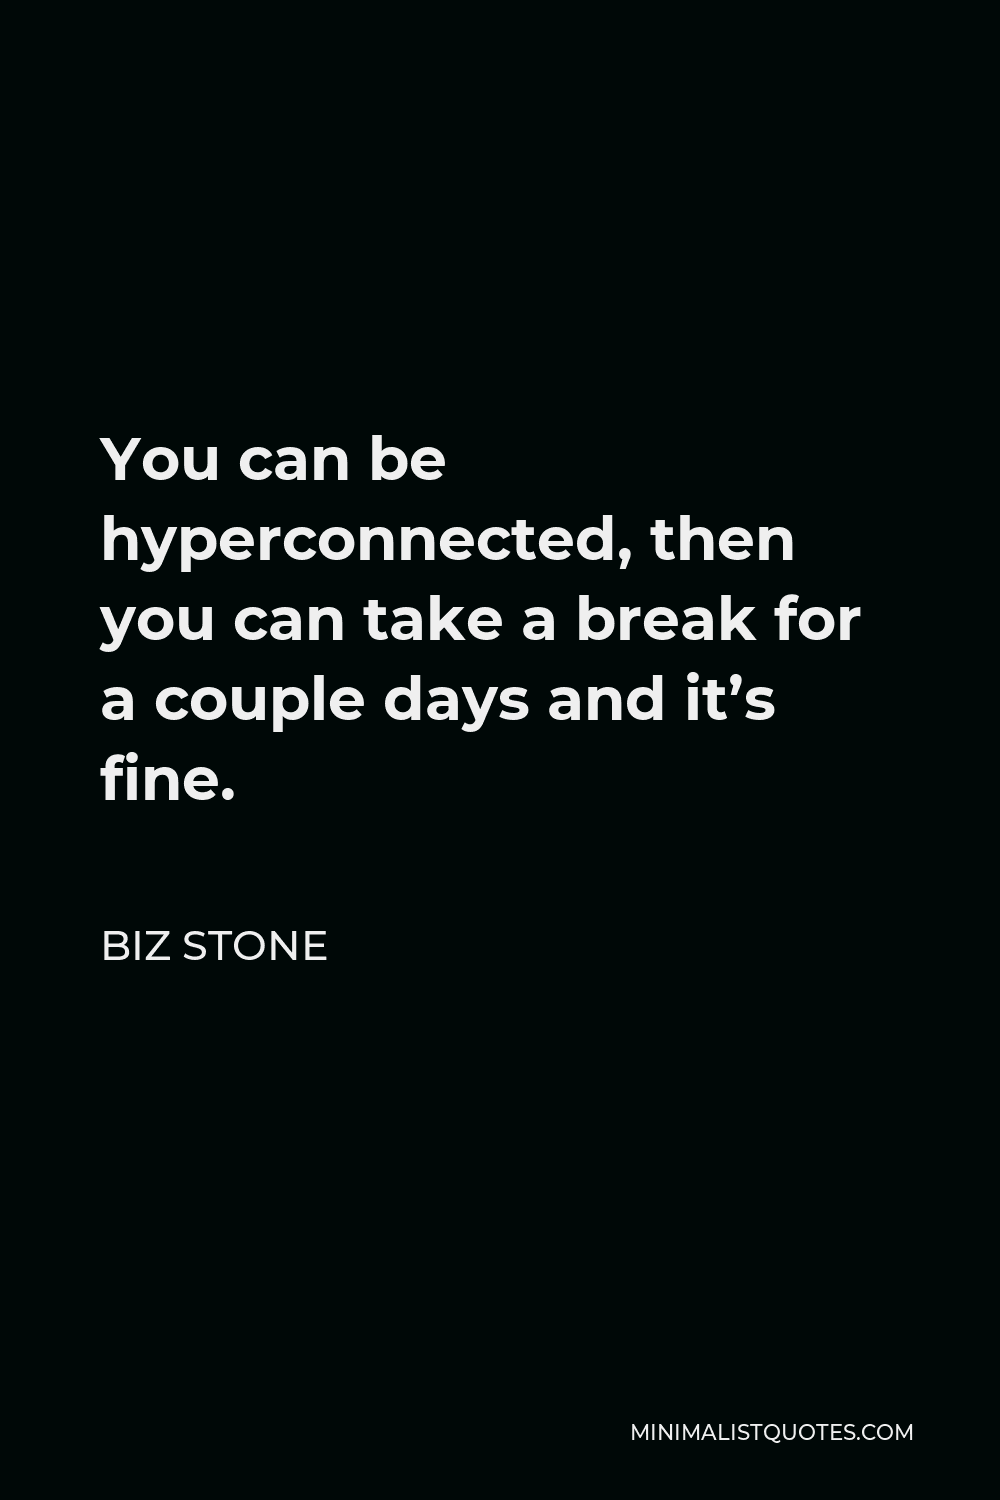 Biz Stone Quote - You can be hyperconnected, then you can take a break for a couple days and it’s fine.